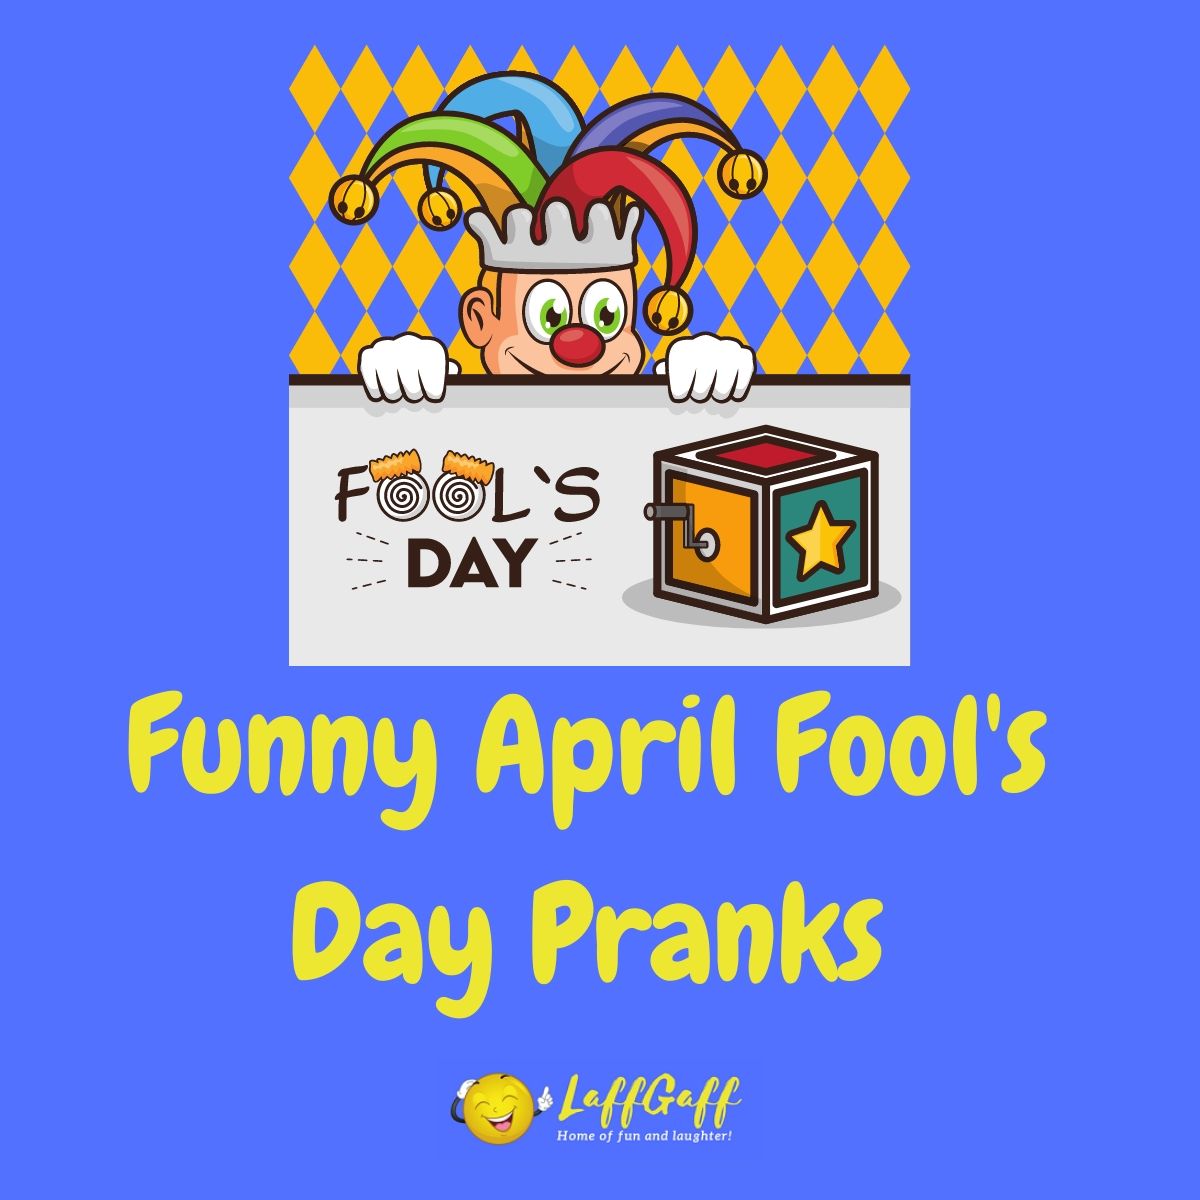 Featured image for a page of funny April Fool's Day pranks and jokes to play on people.